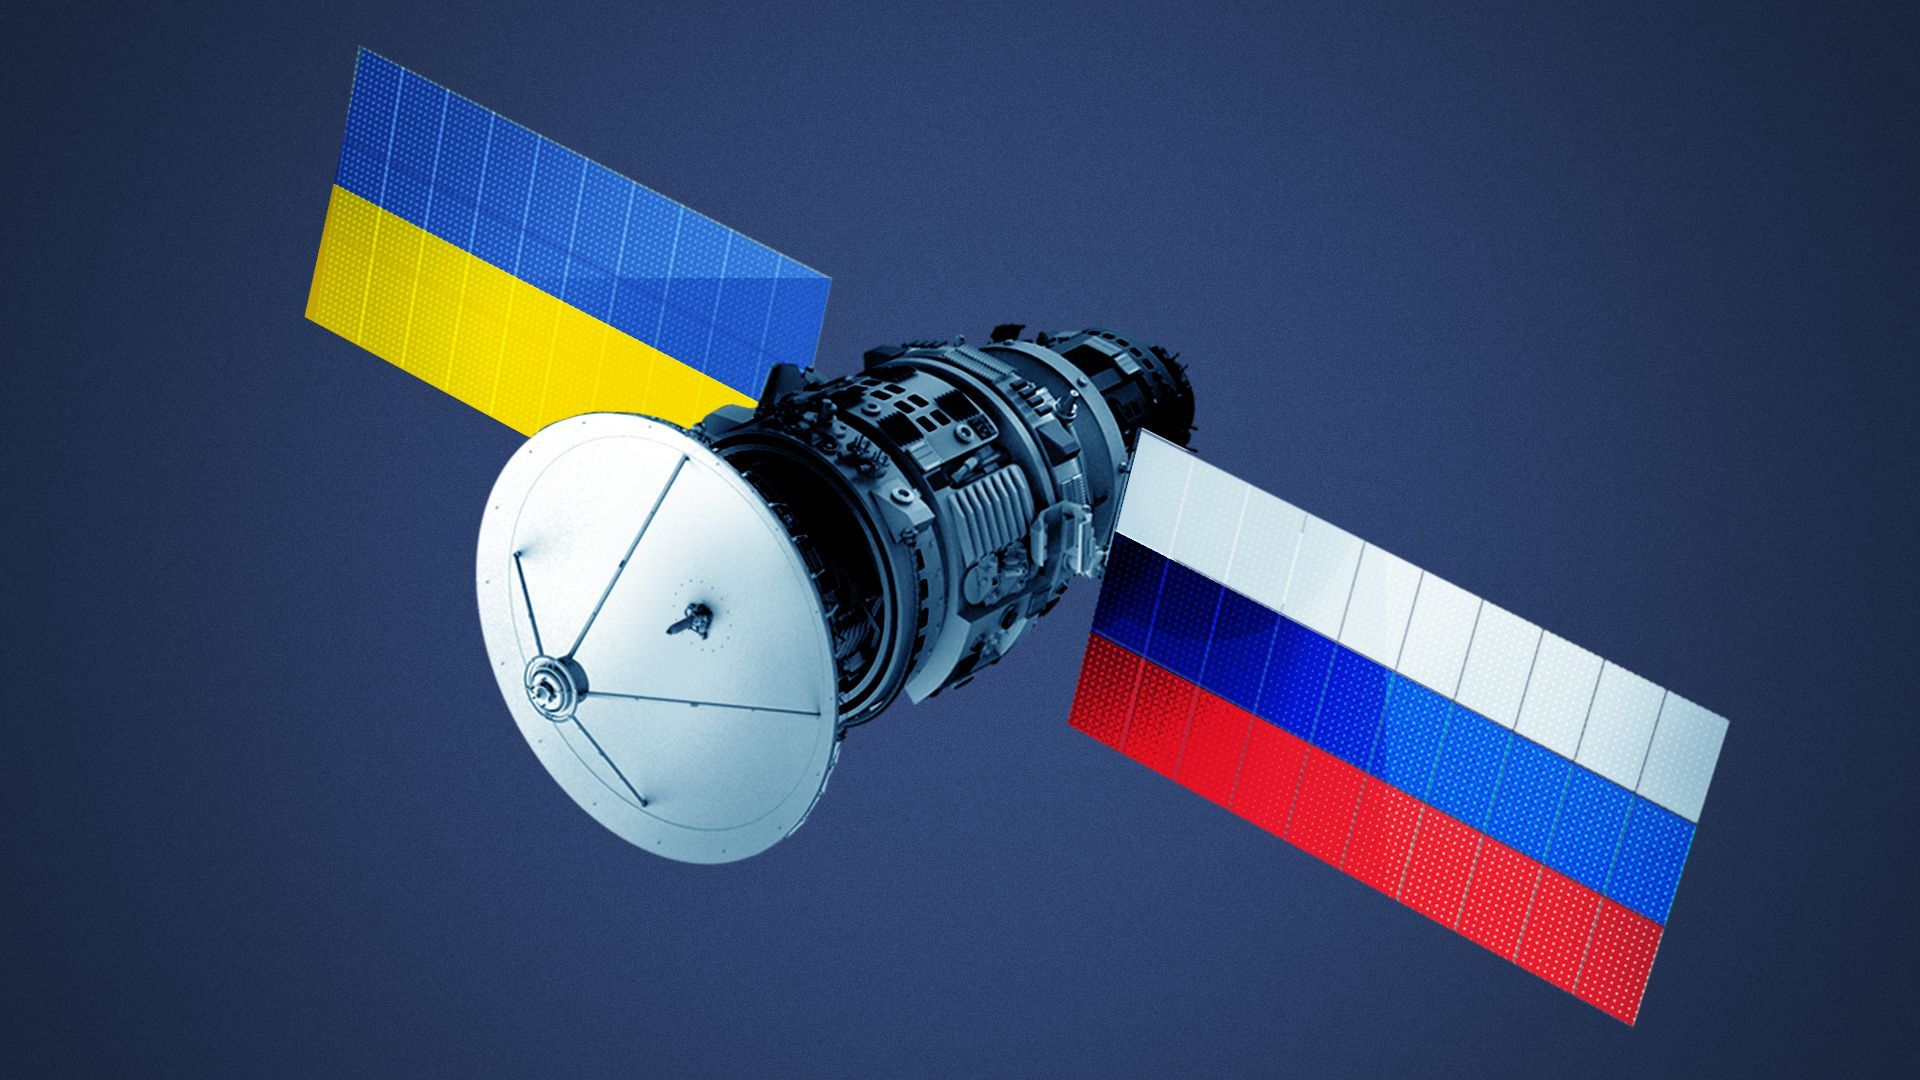 Illustration of a satellite made of the flags of Russia and Ukraine.